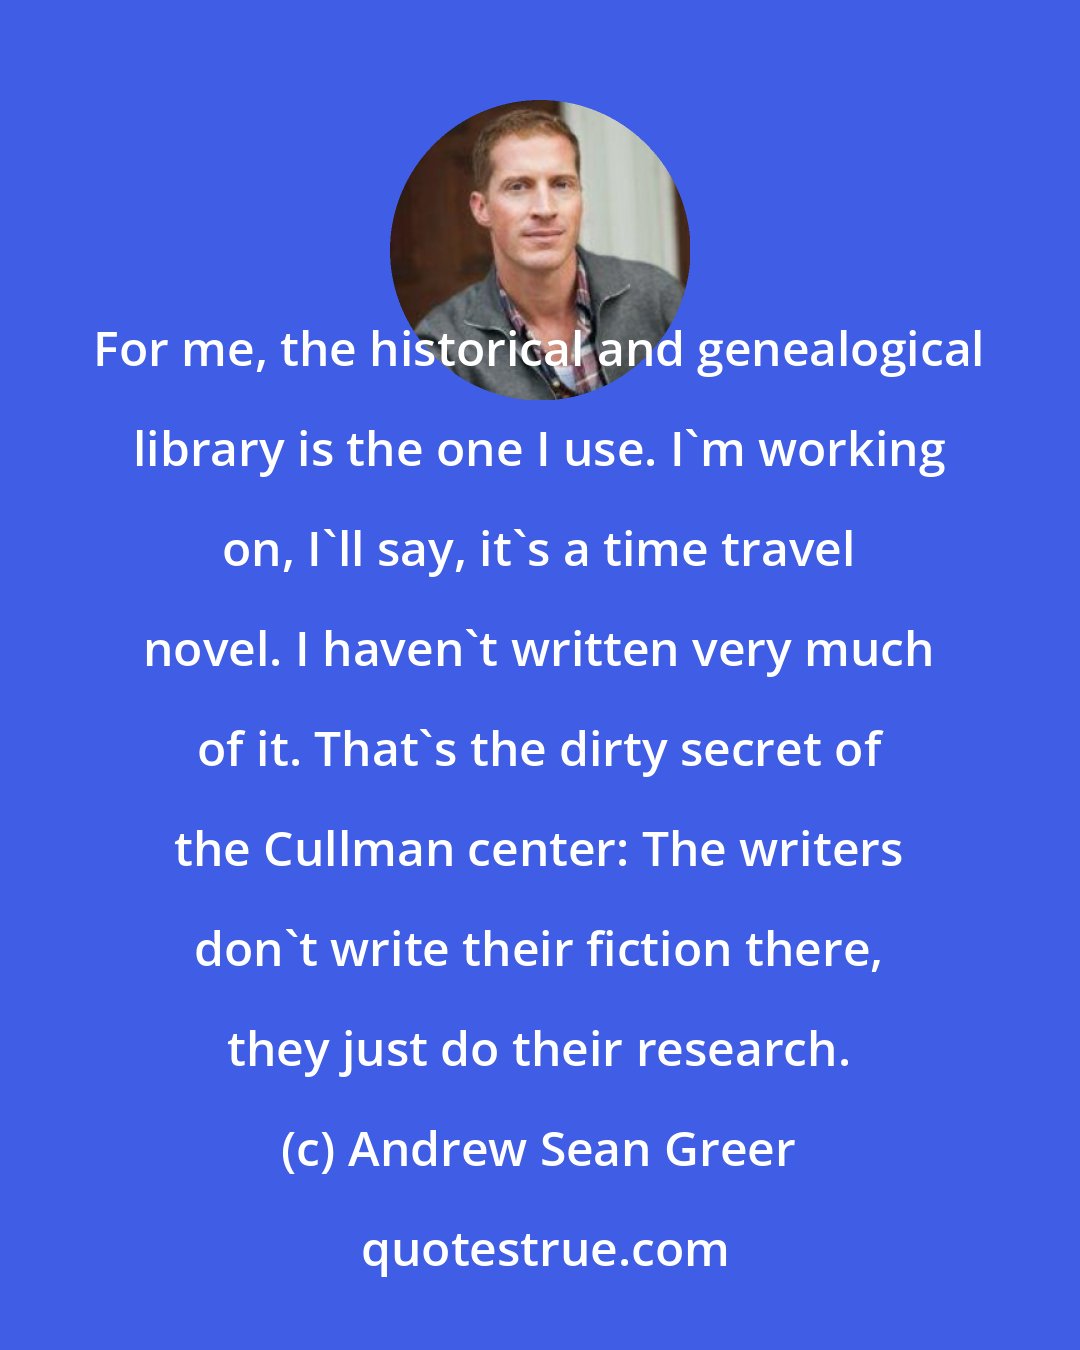 Andrew Sean Greer: For me, the historical and genealogical library is the one I use. I'm working on, I'll say, it's a time travel novel. I haven't written very much of it. That's the dirty secret of the Cullman center: The writers don't write their fiction there, they just do their research.